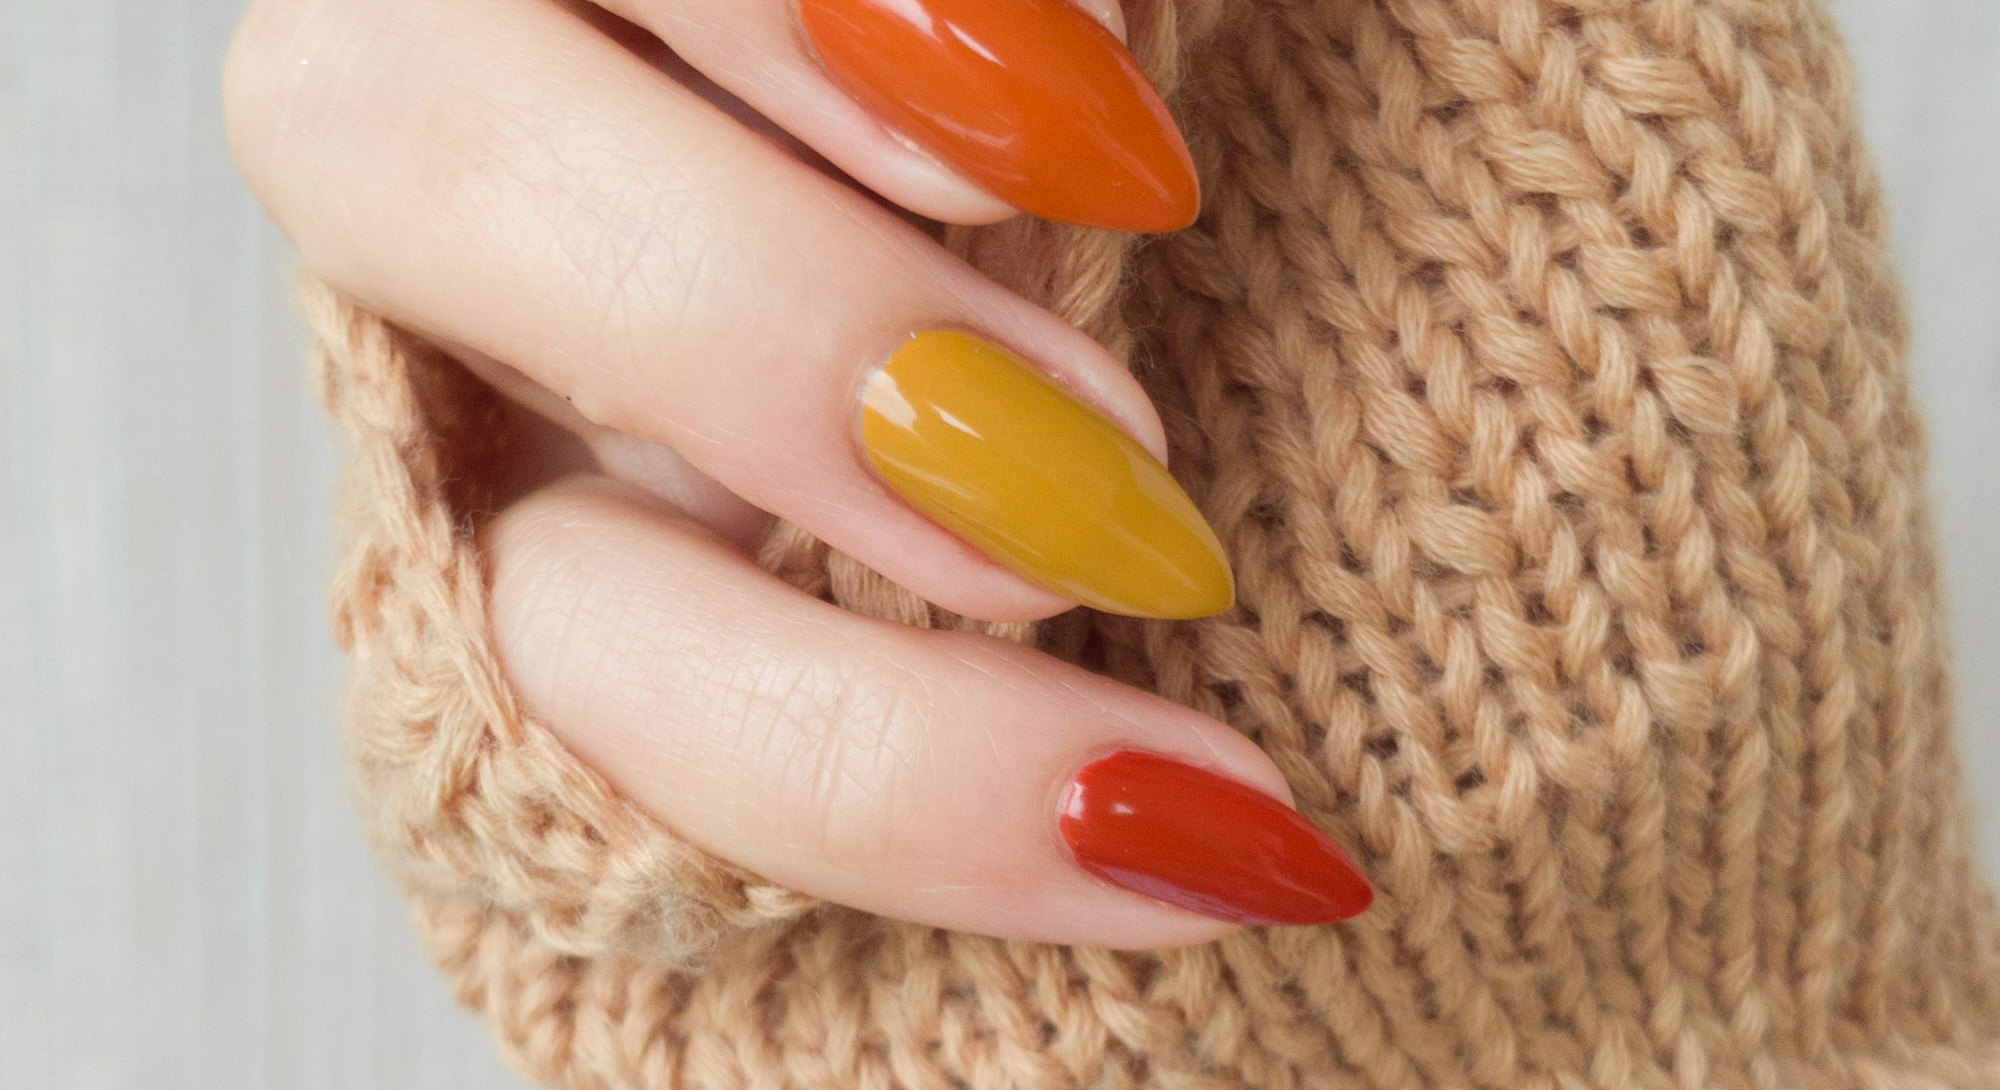 Female hands with long nails with yellow golden nail polish